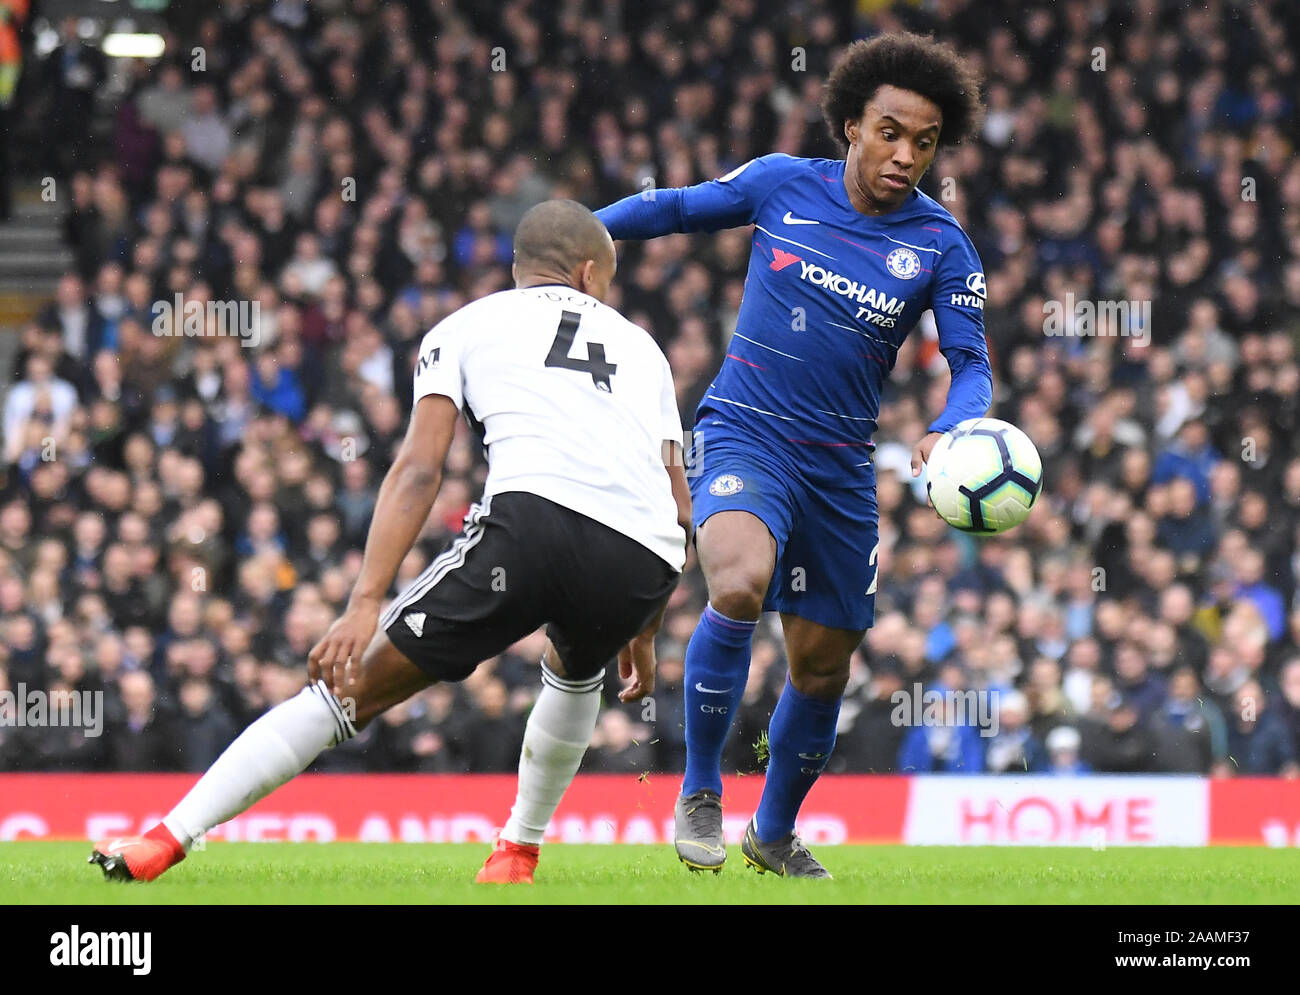 LONDON, ENGLAND - MARCH 3, 2019: Willian Borges da Silva of Chelsea pictured during the 2018/19 Premier League game between Fulham FC and Chelsea FC at Craven Cottage. Stock Photo